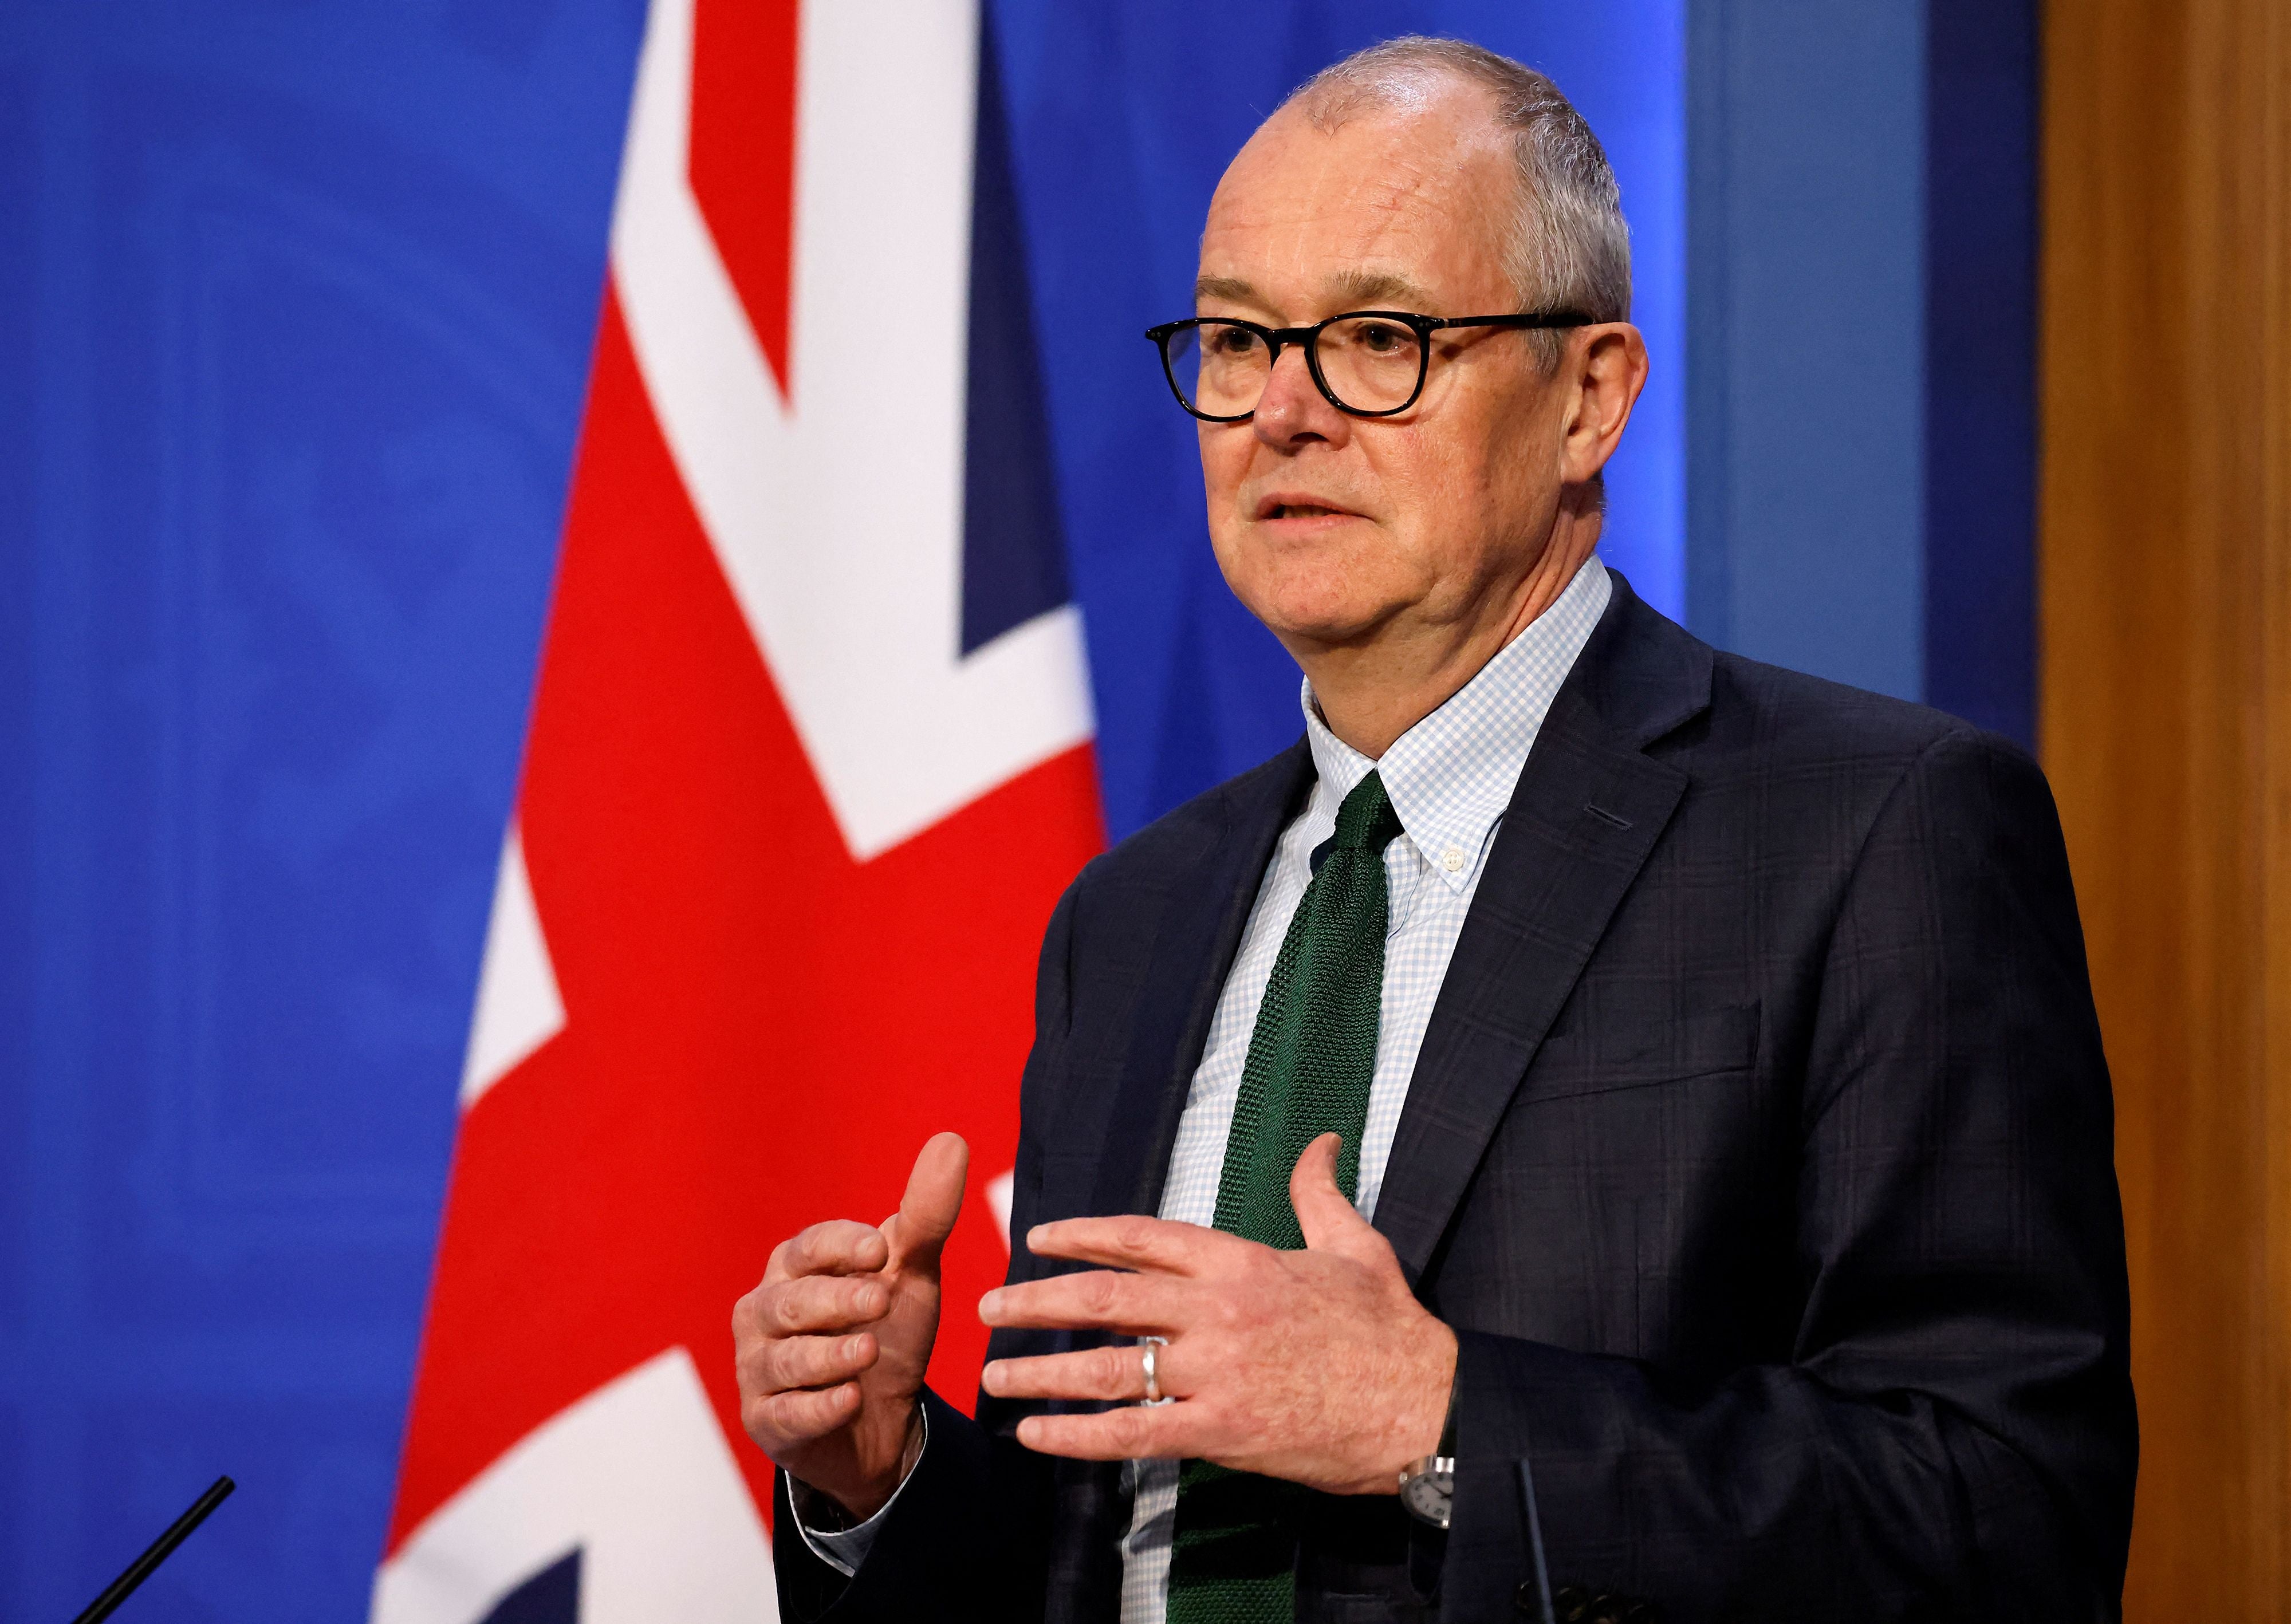 Sir Patrick Vallance advised the government during the global Covid pandemic and appeared in regular Downing Street briefings